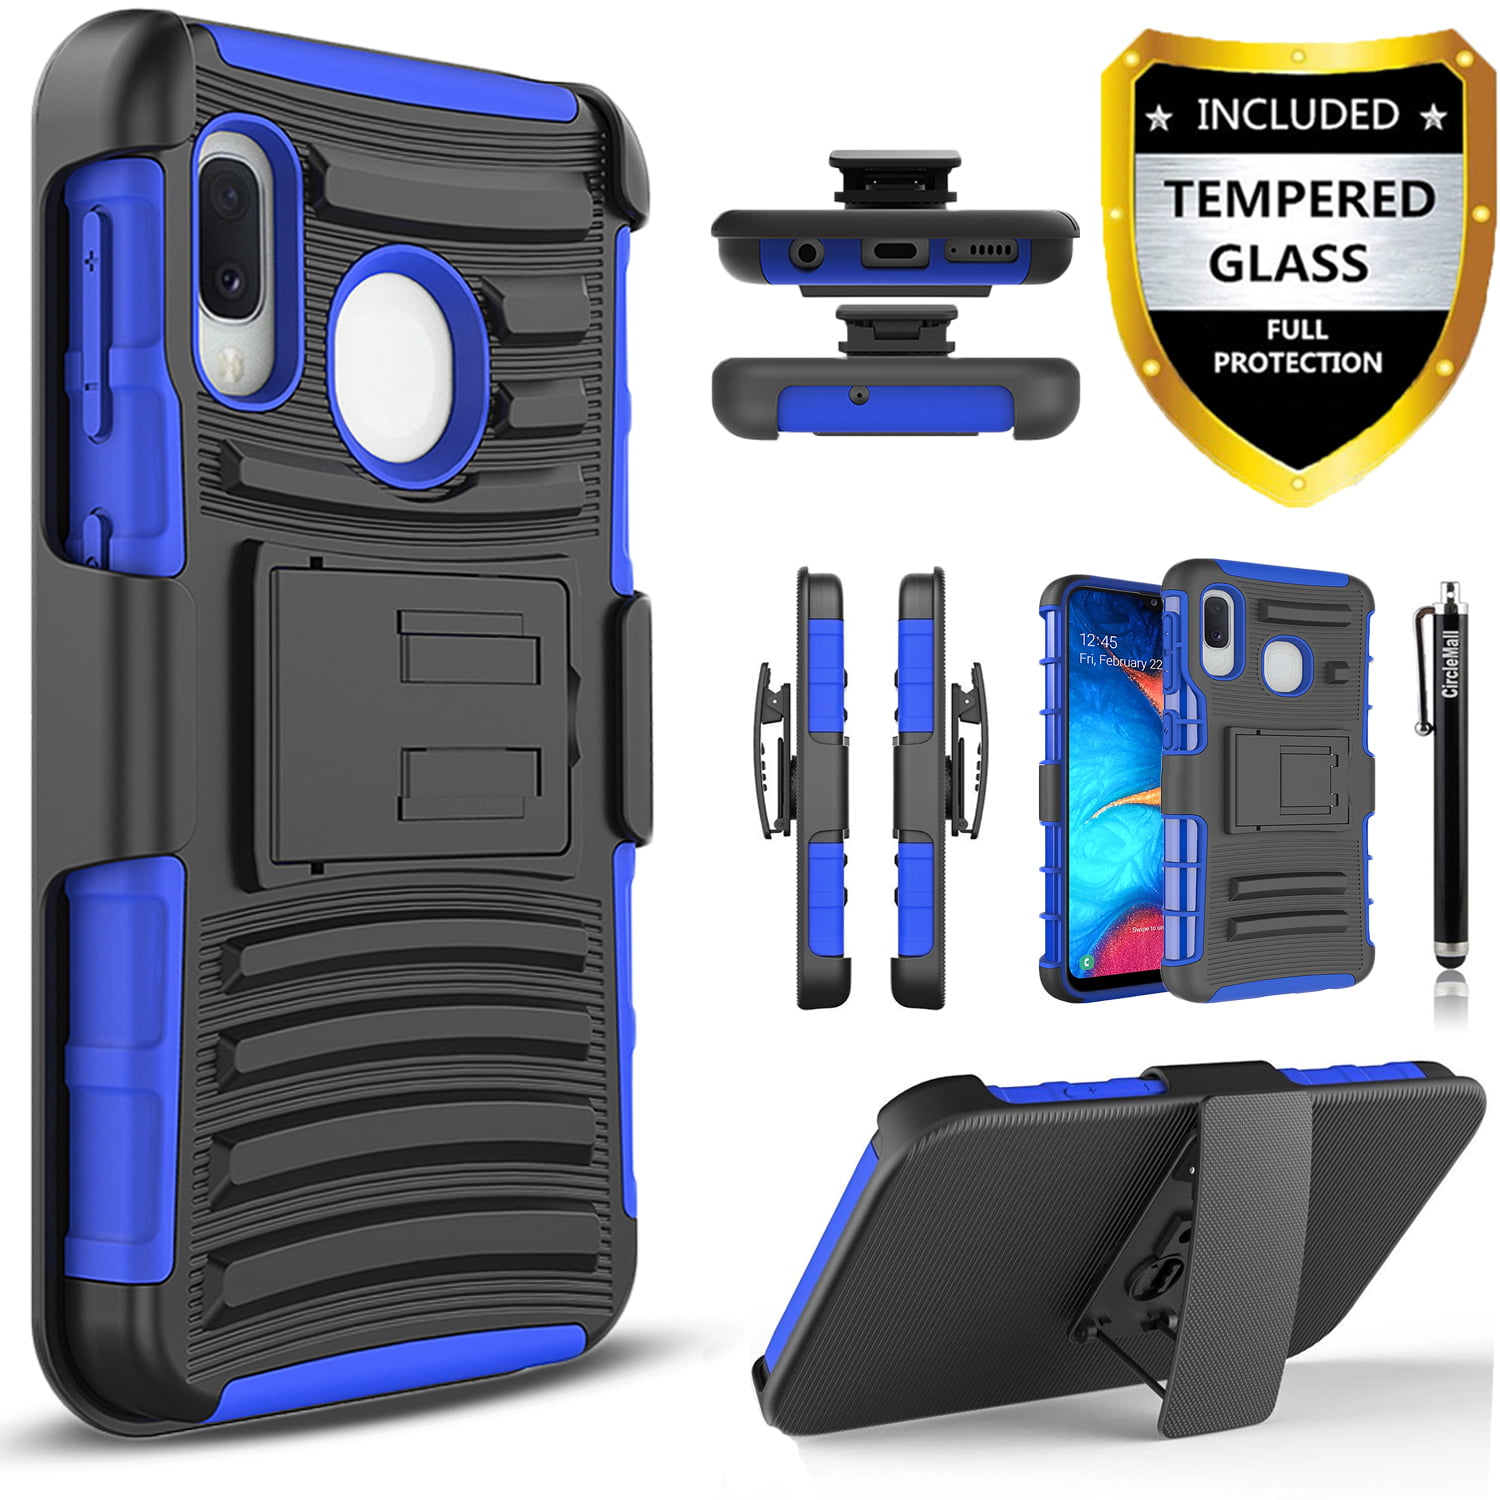 Samsung Galaxy A10e Phone Case, Dual Layers [Combo Holster] And Built-In Kickstand Bundled with [Temerped Glass Screen Protector] Hybird Shockproof And Circlemalls Stylus Pen (Camo)